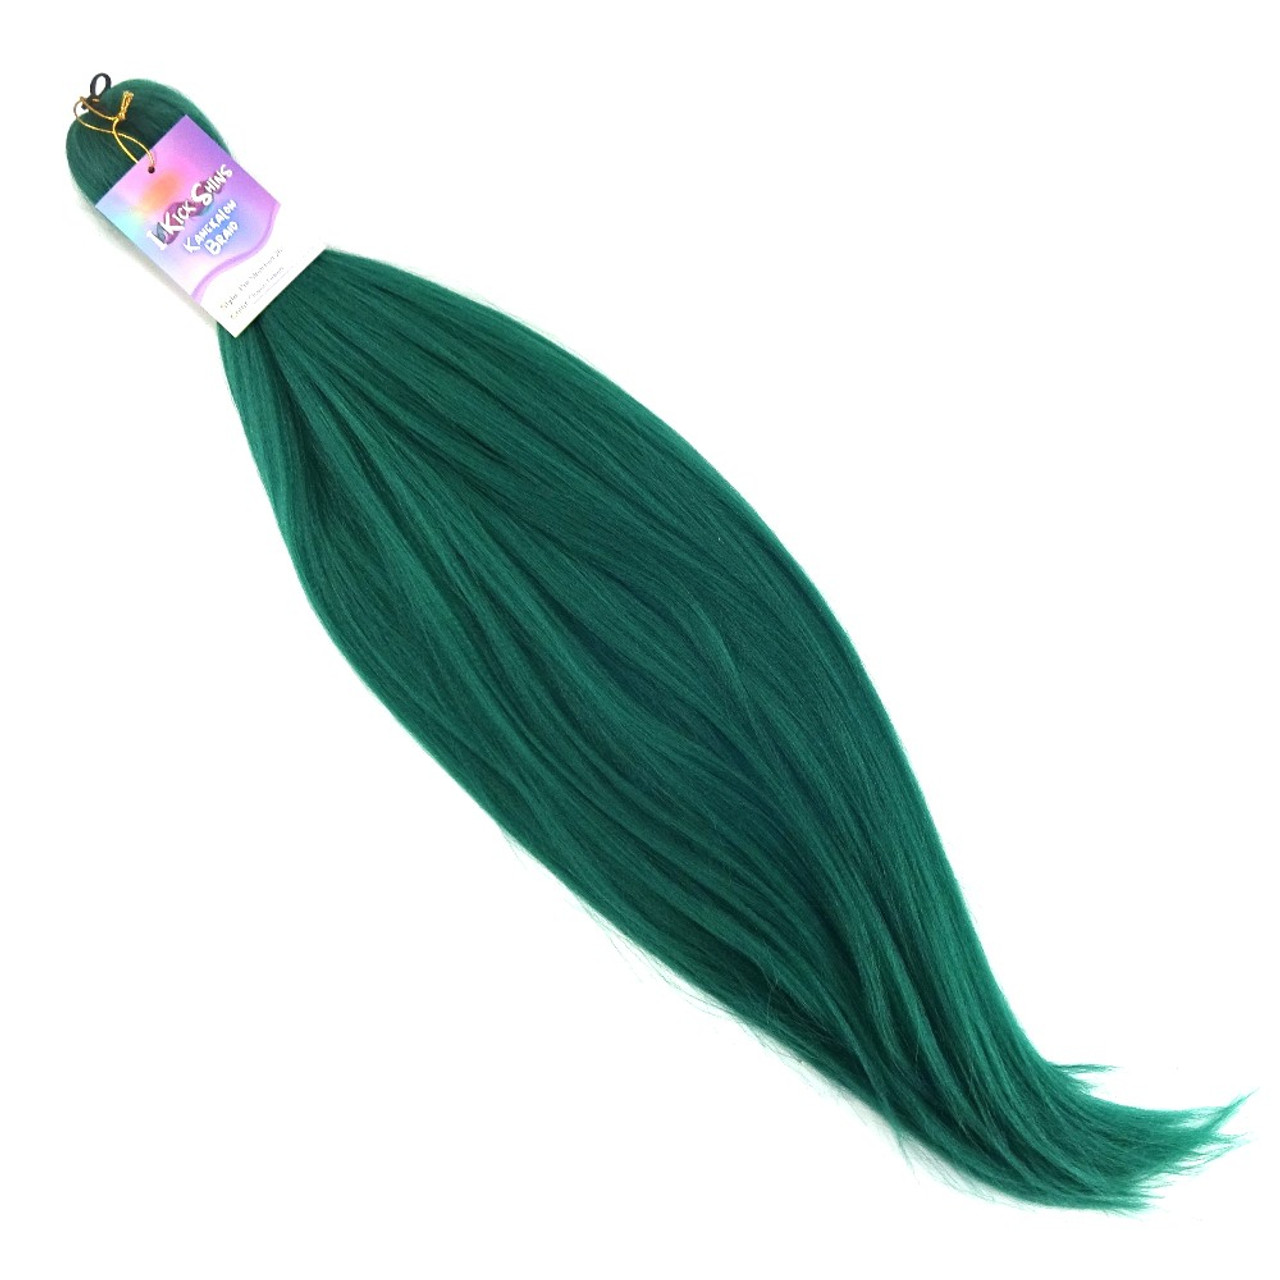  Gozill Emerald Green Braiding Hair Pre Stretched Kanekalon  Braiding Hair Extension 26 Inch Colored Synthetic Fake Hair for Braiding :  Beauty & Personal Care